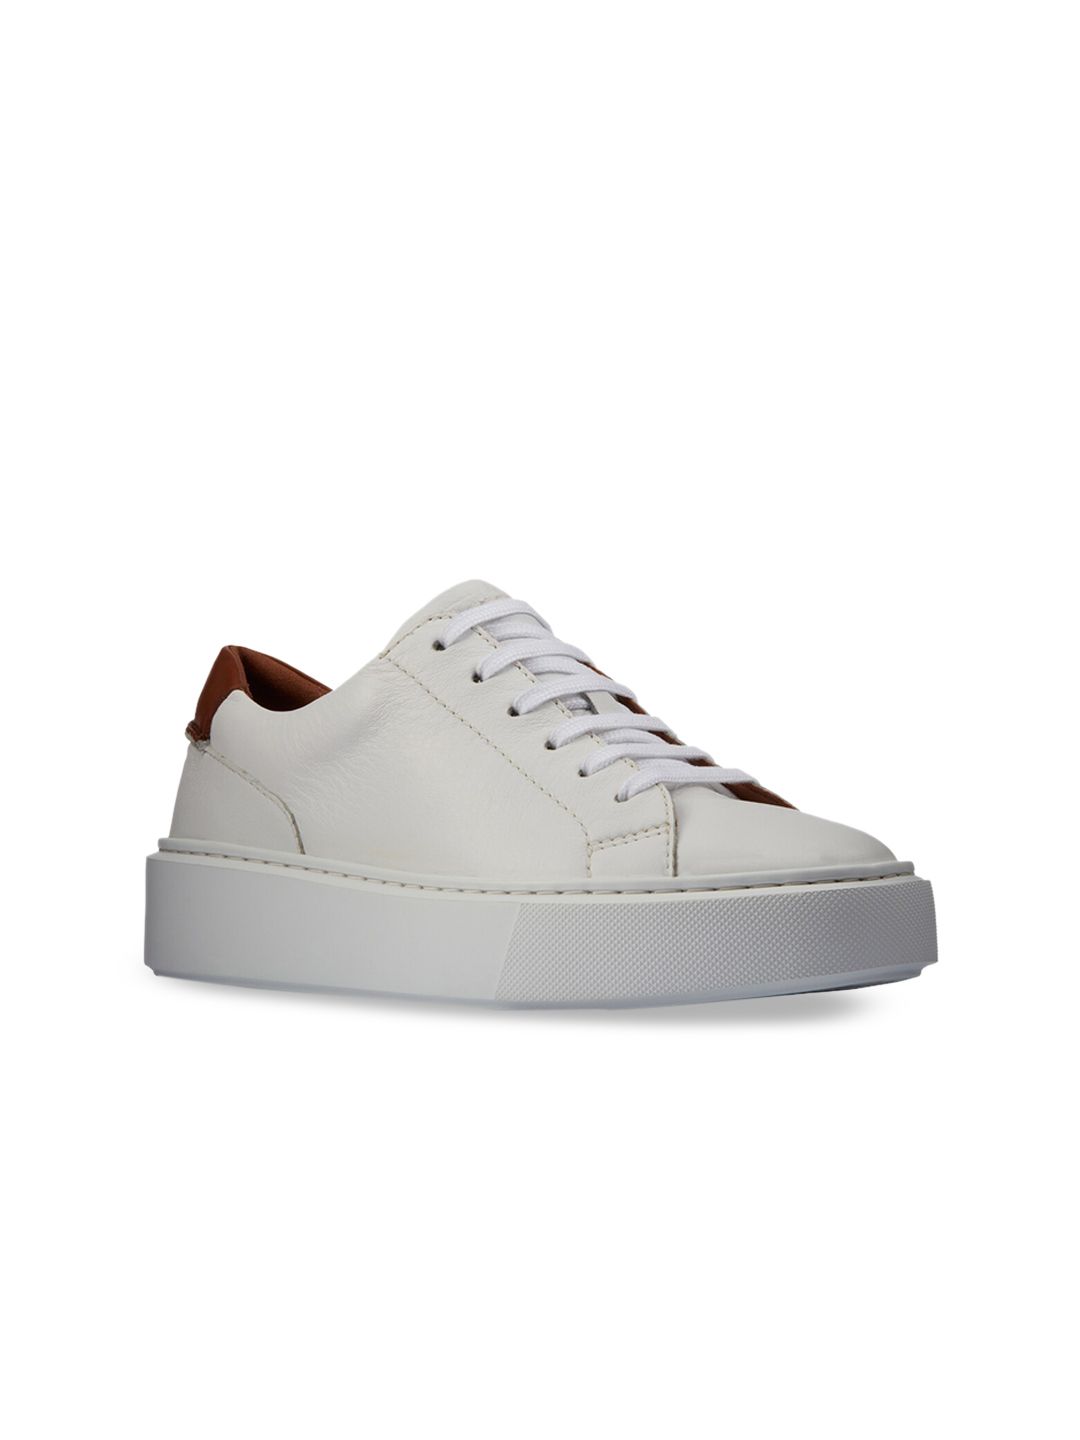 Clarks Women White Leather Sneakers Price in India